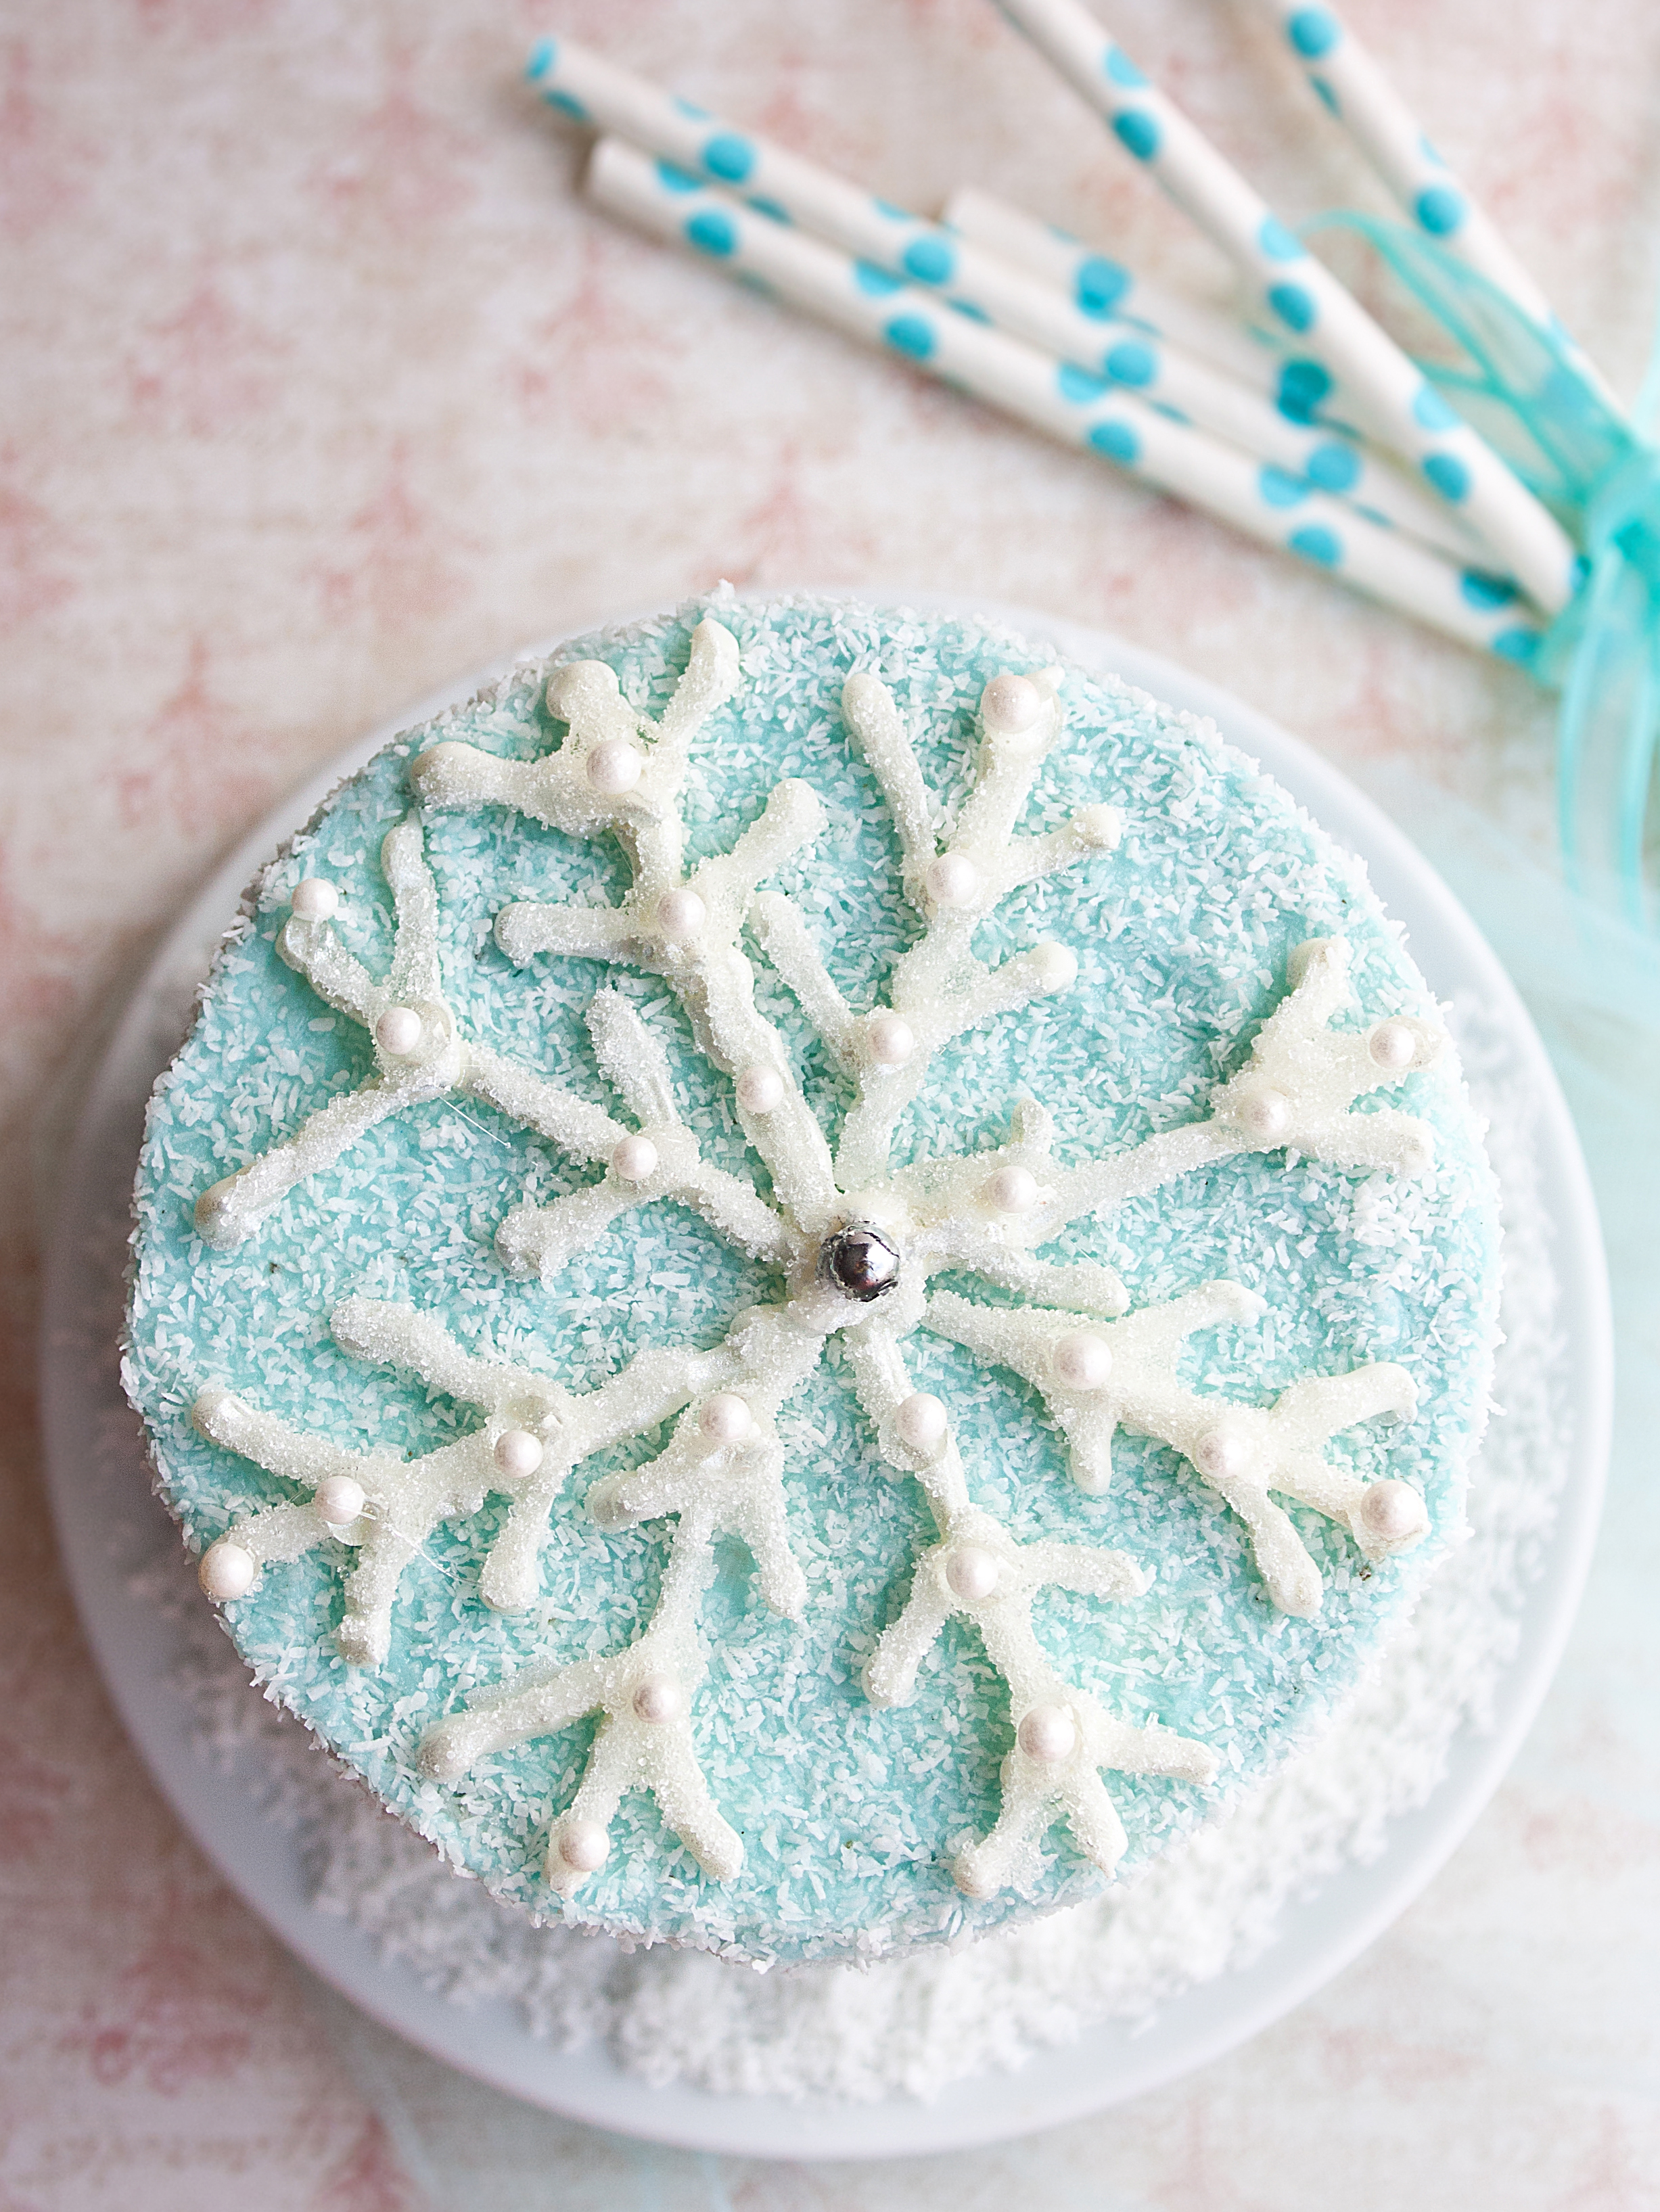 How to Make Snowflake Cake Toppers